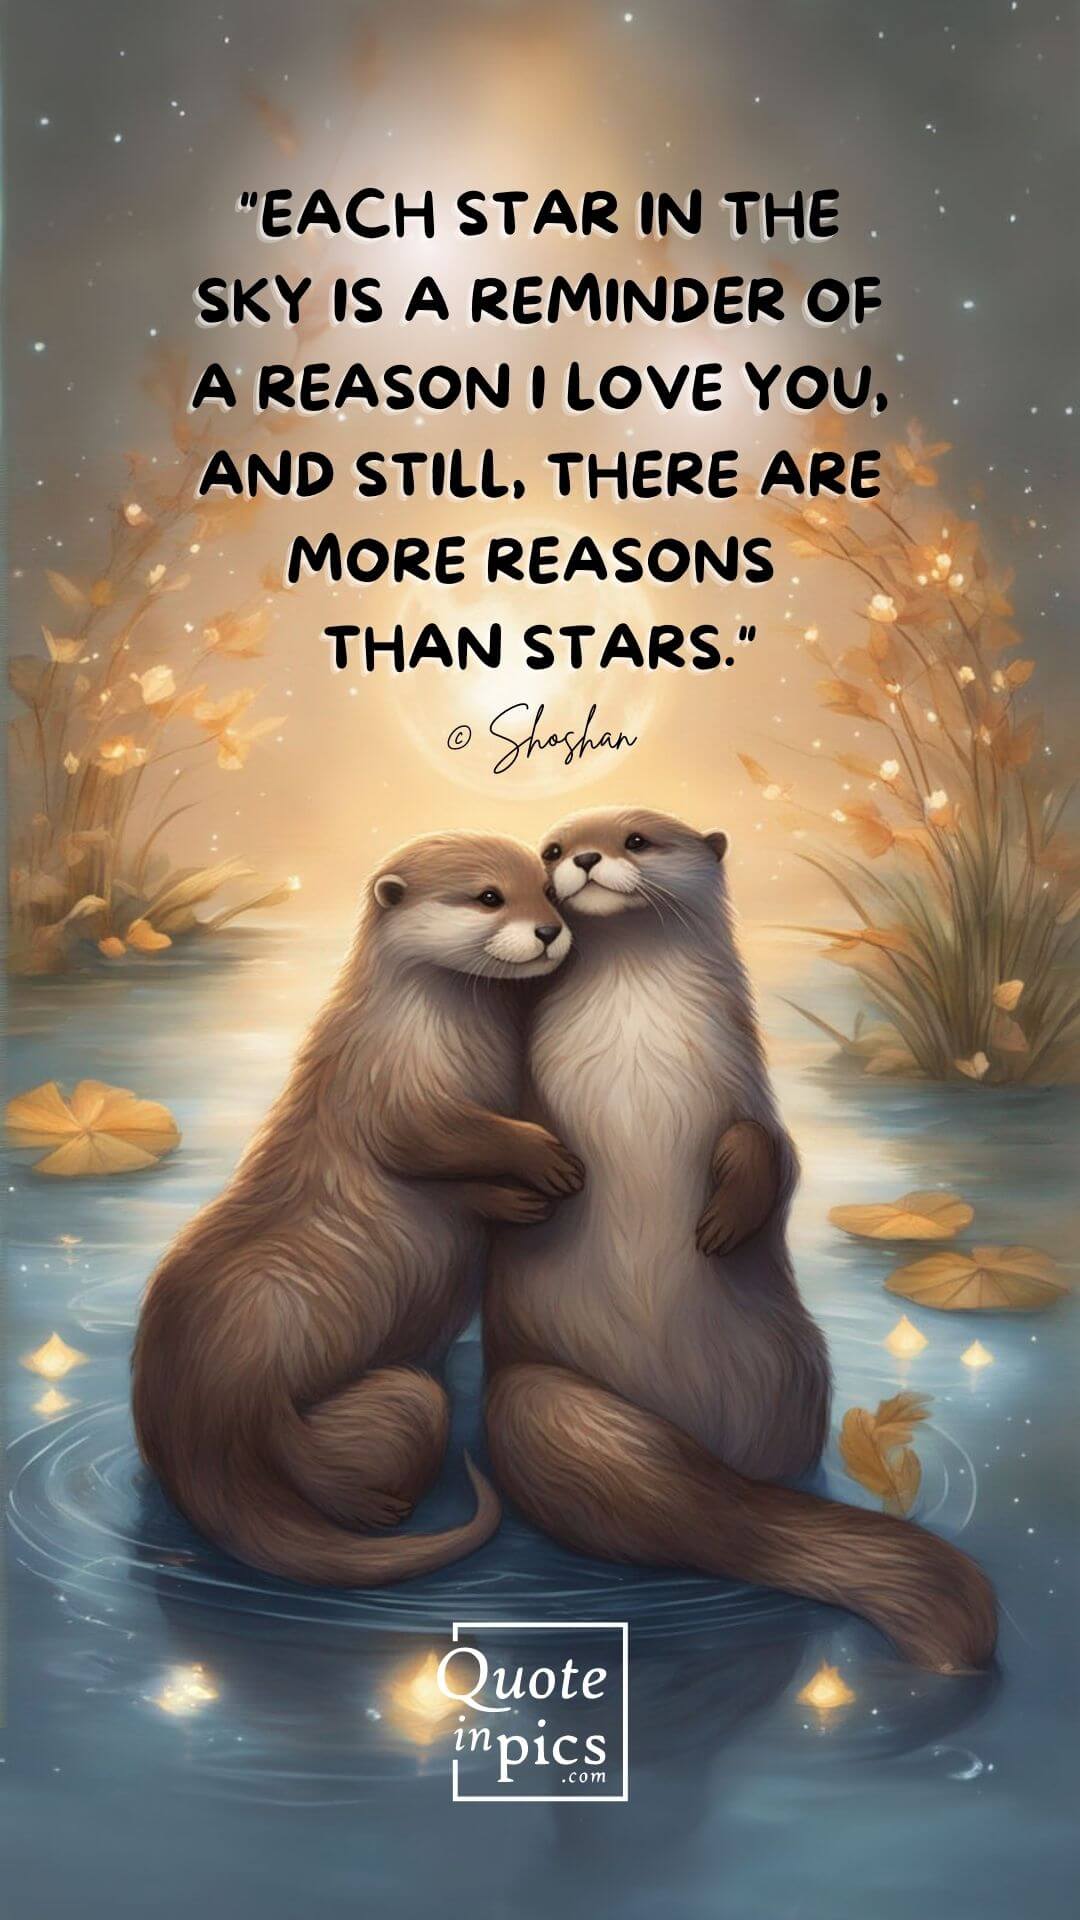 Each star in the sky is a reminder of a reason I love you, and still, there are more reasons than stars.